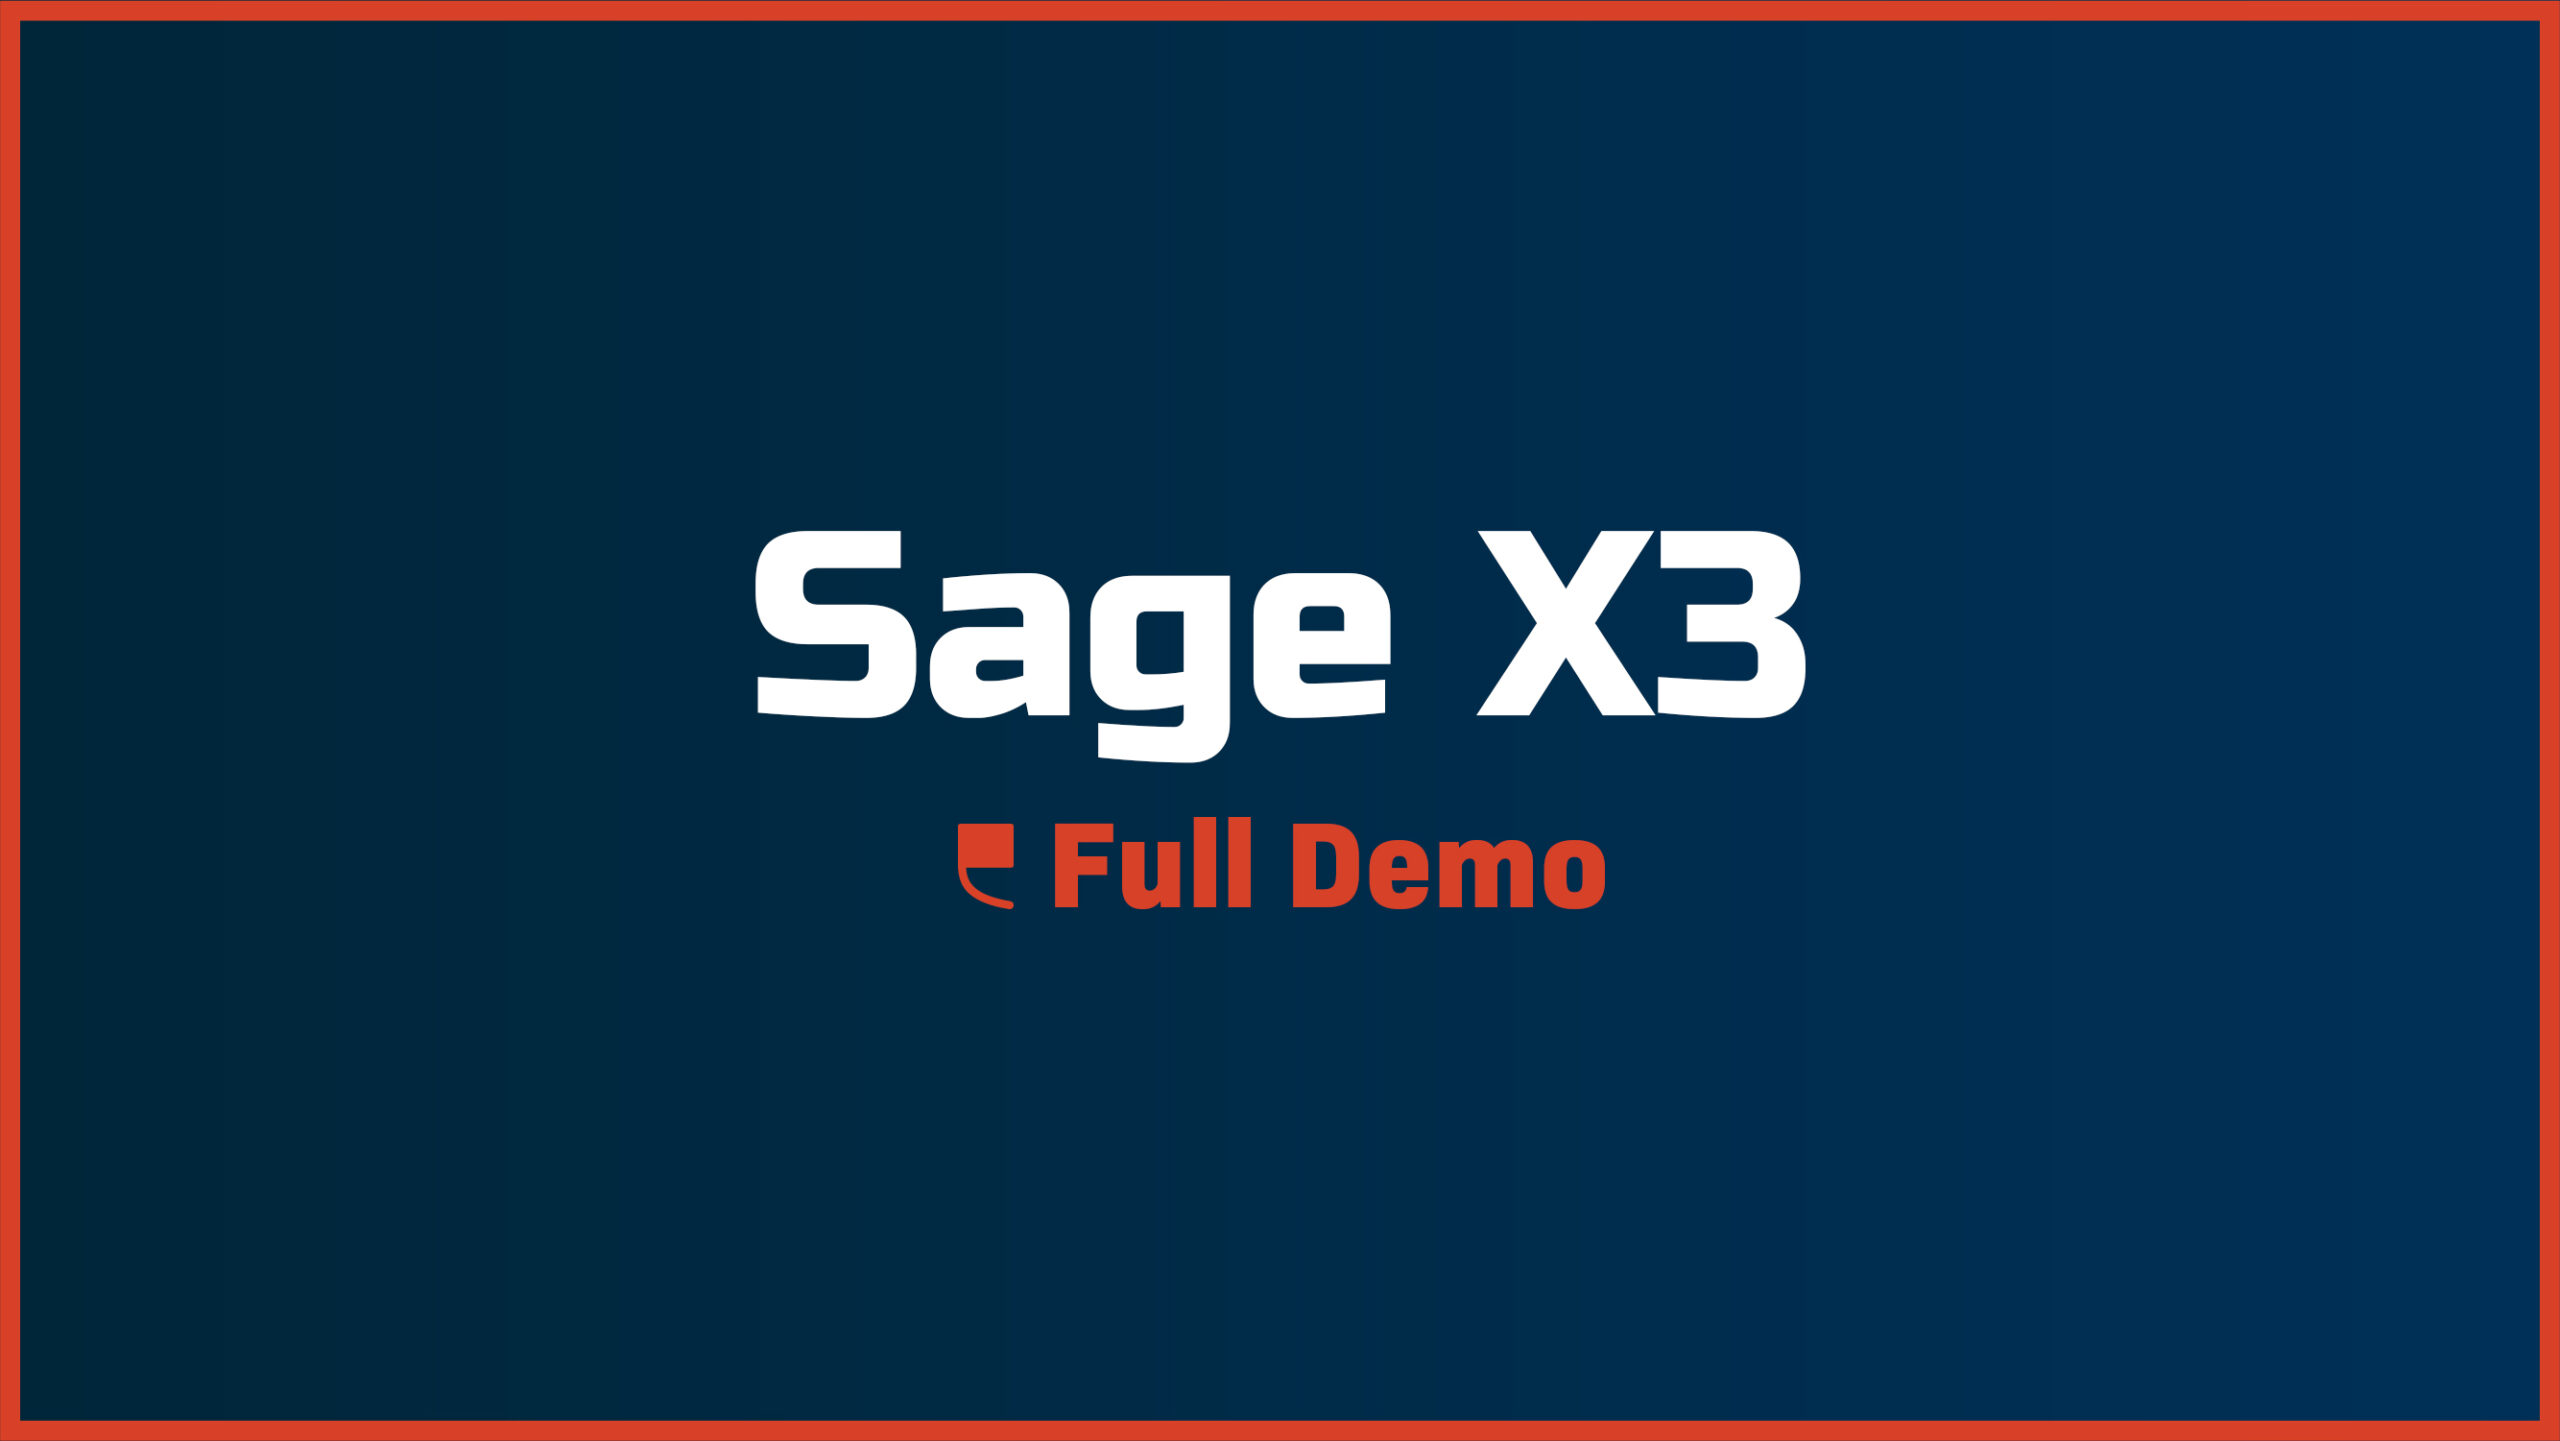 Sage X3 – Full Demo - Featured Image